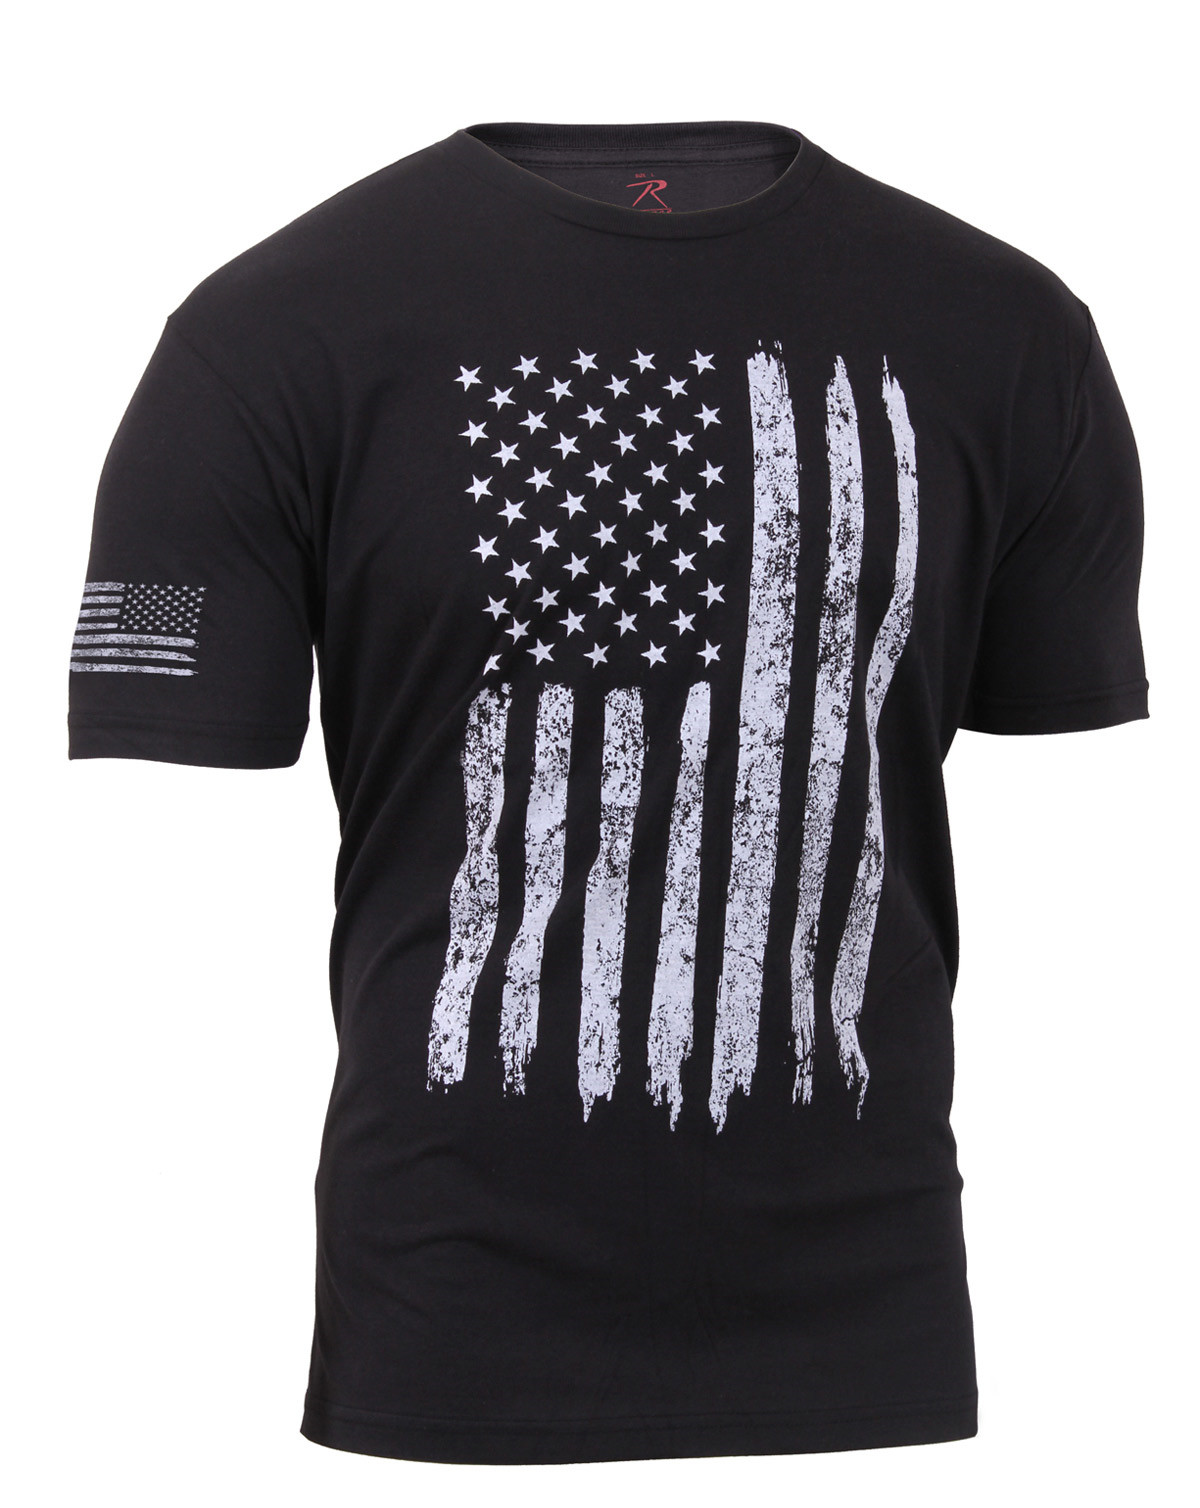 Rothco T-shirt - 'Distressed US Flag', Athletic Fit (Sort, L)